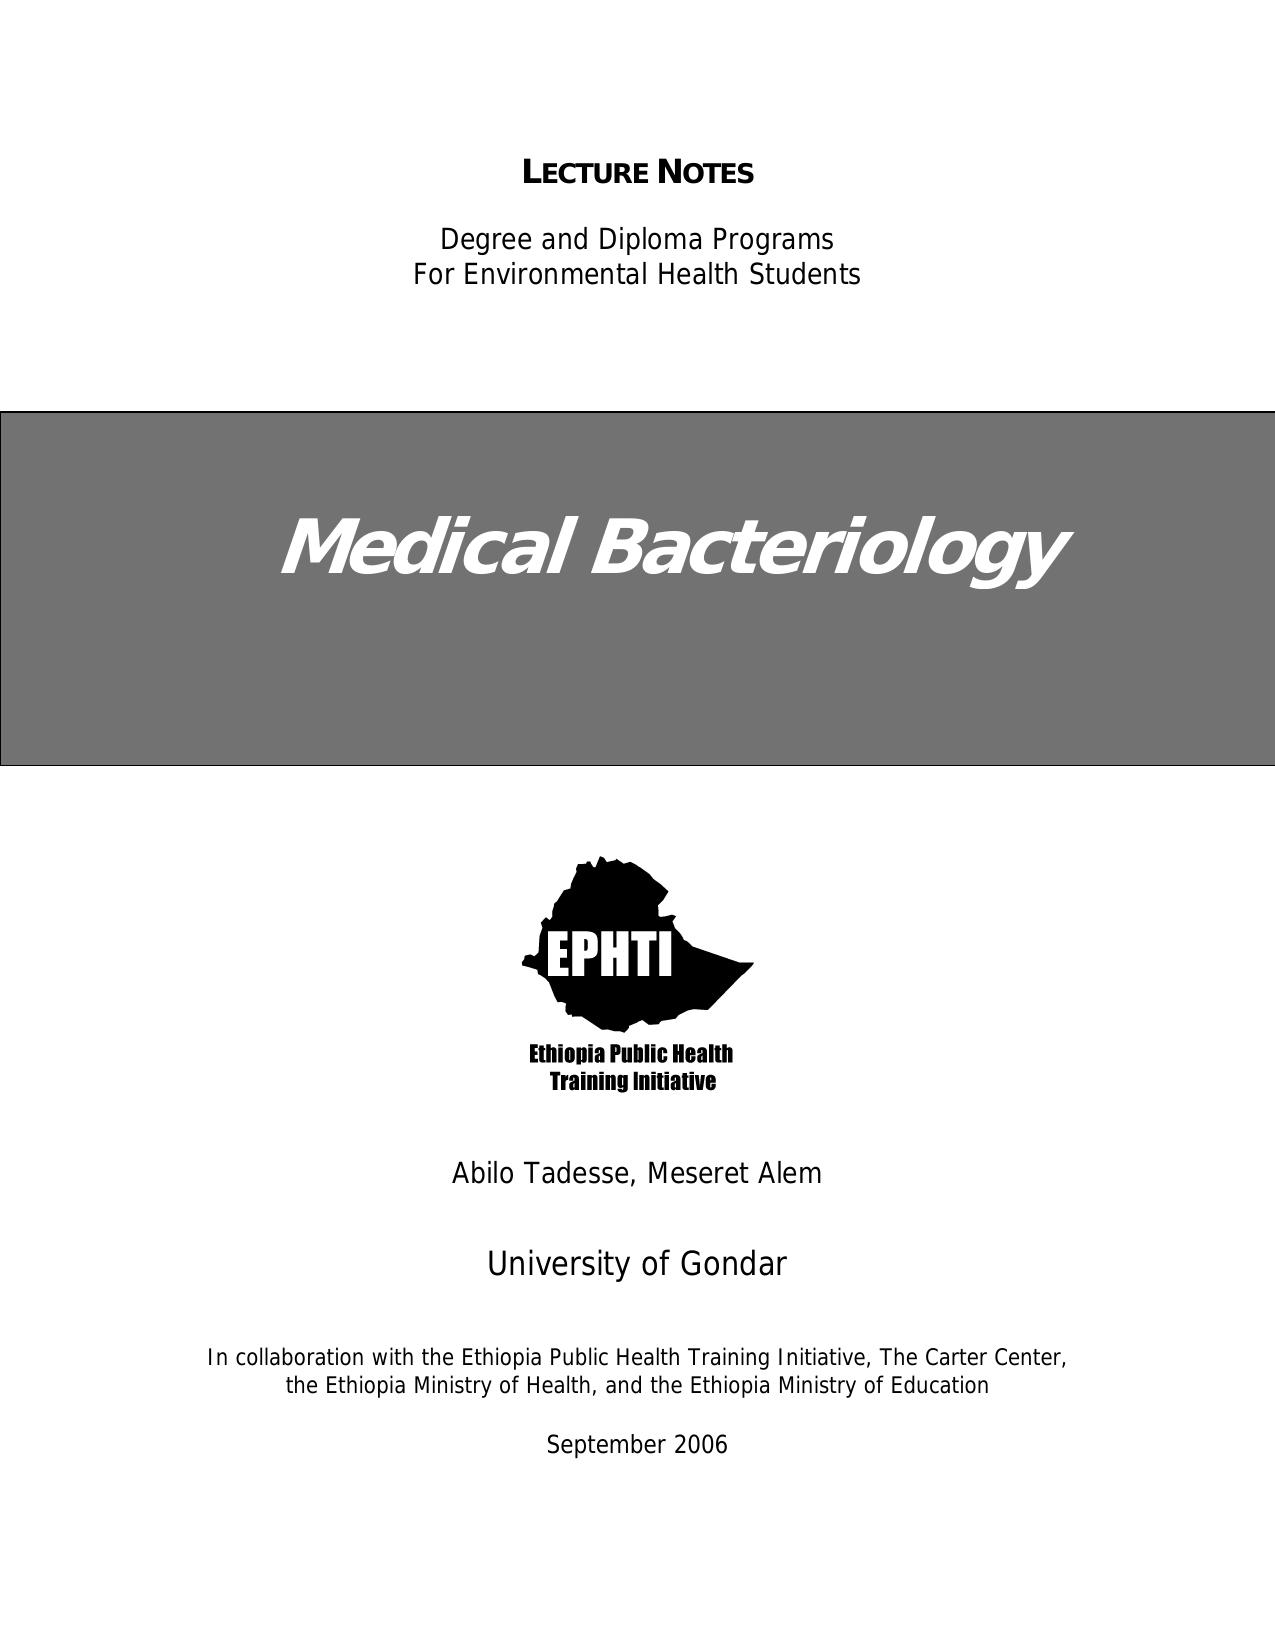 Microsoft Word - lecnote_fm_degree and diploma Med Bacteriology